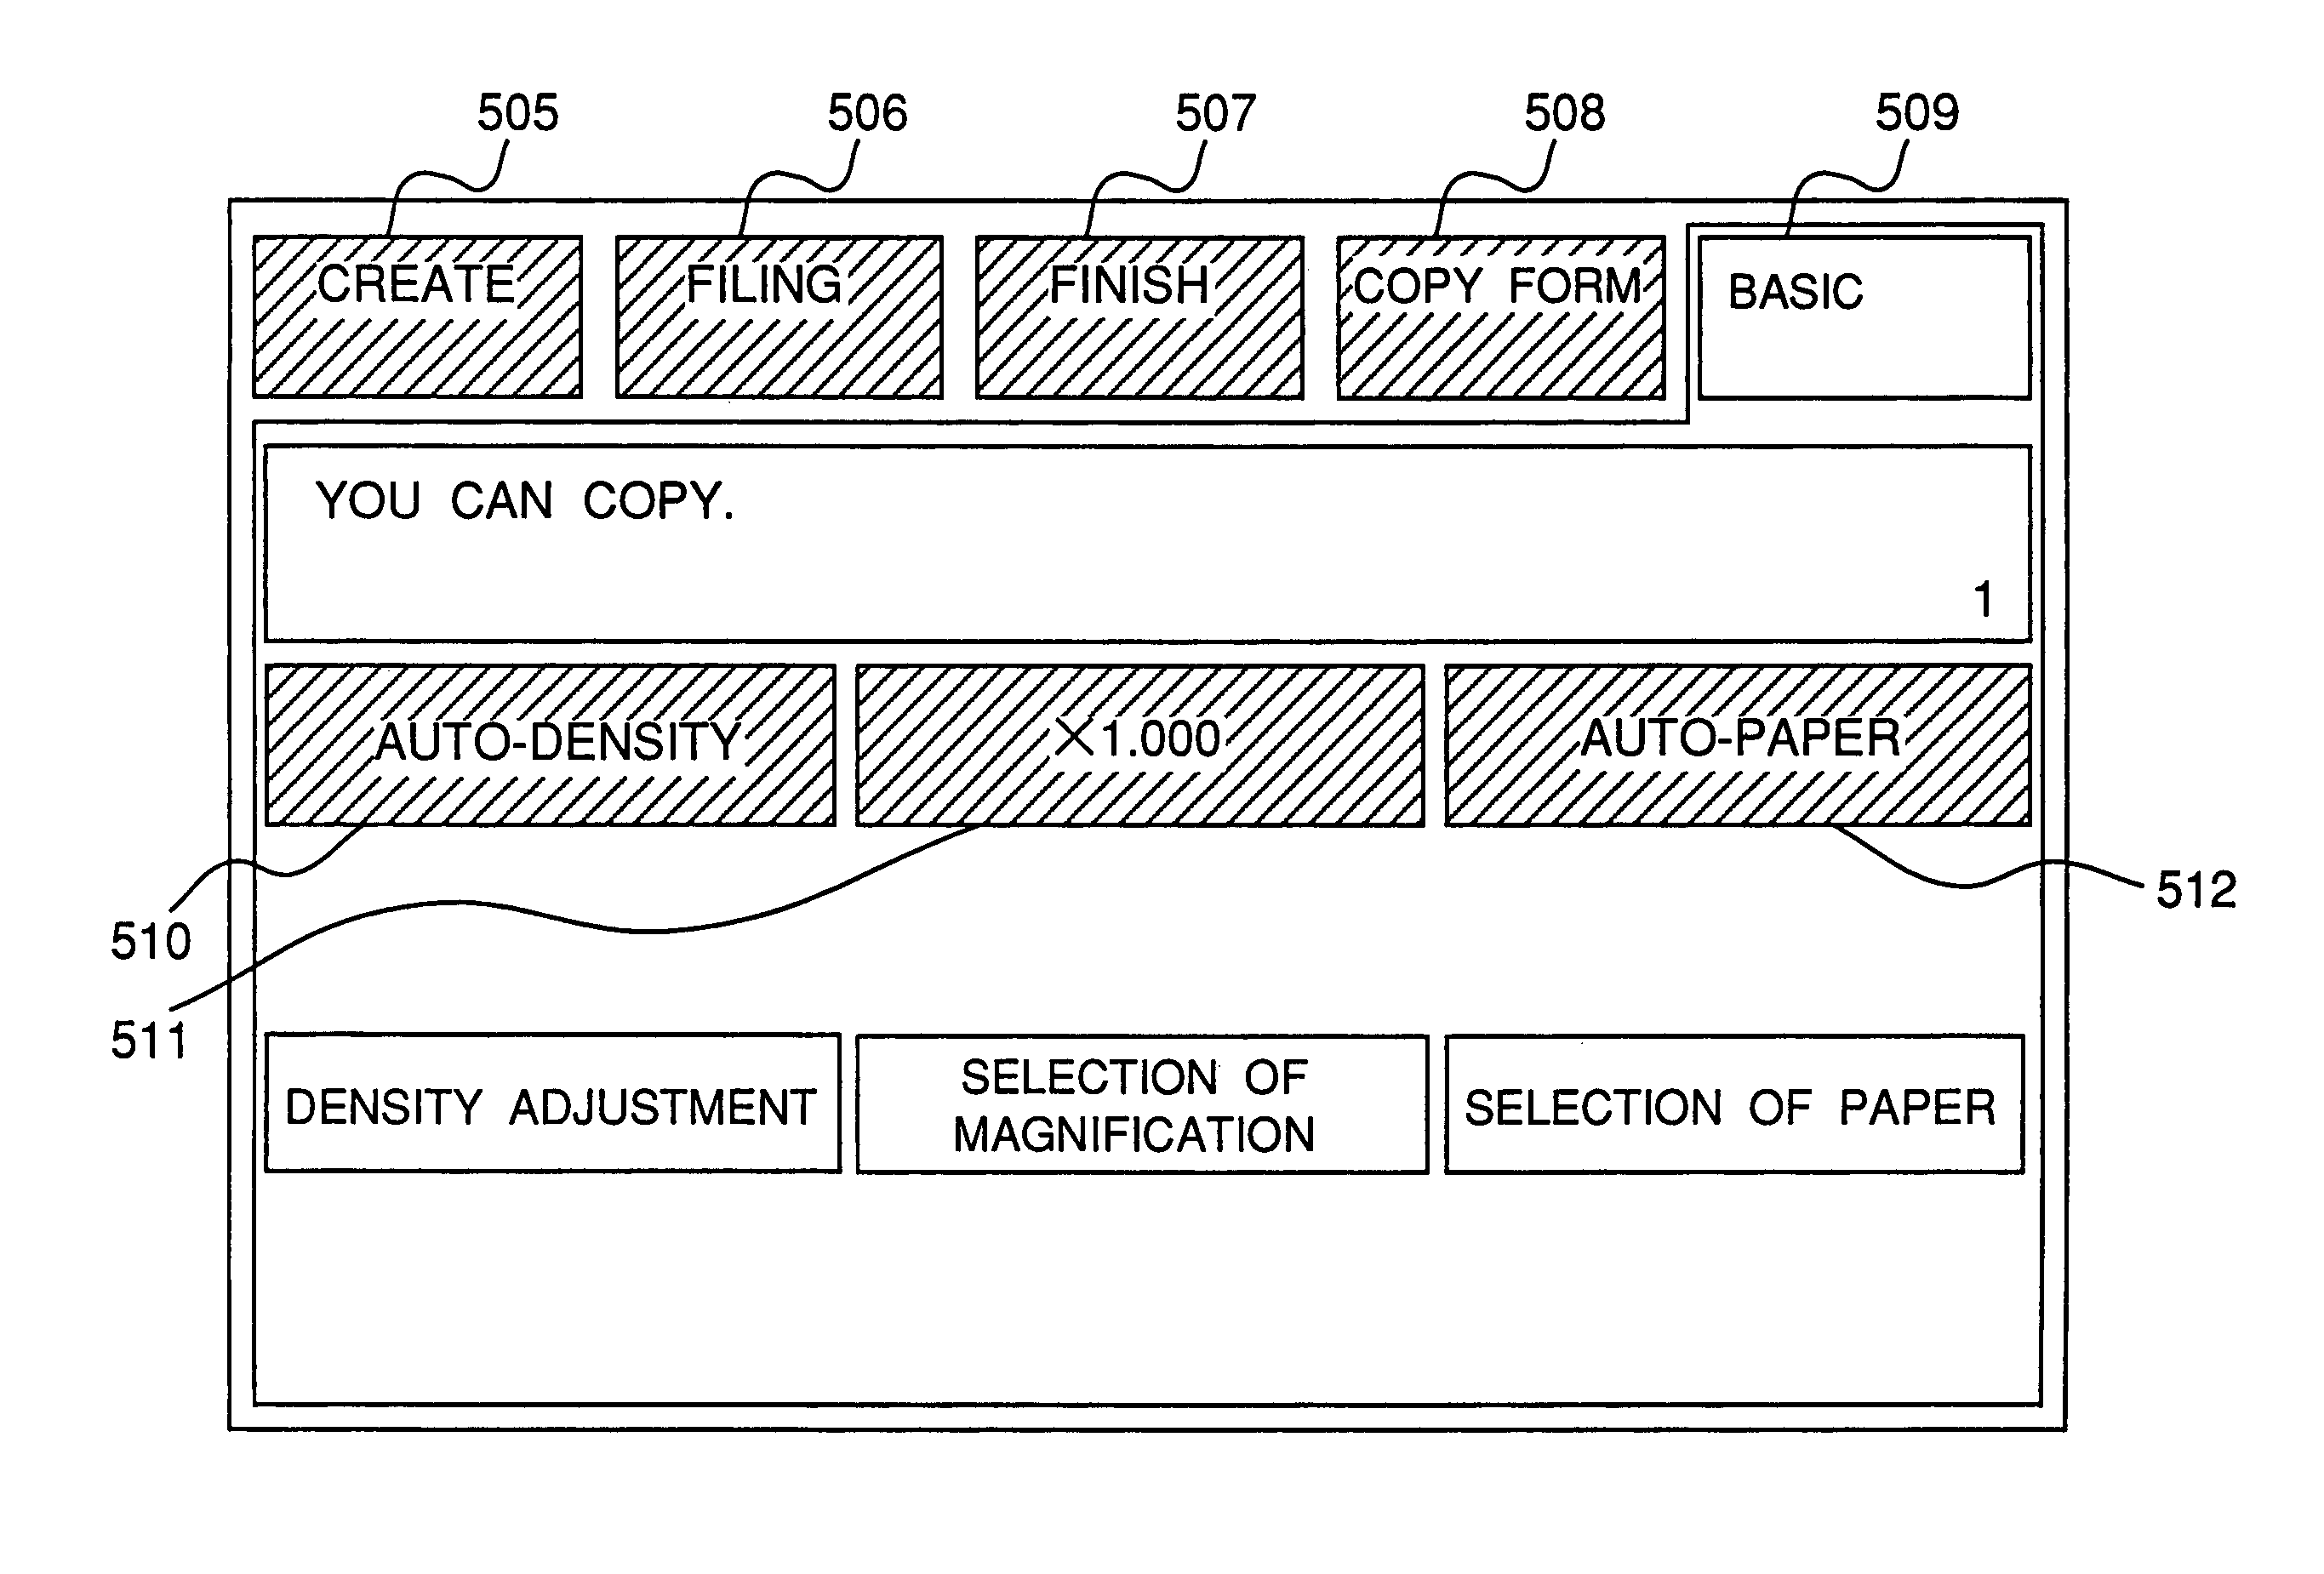 Image forming apparatus having a display changeable in color according to operational mode